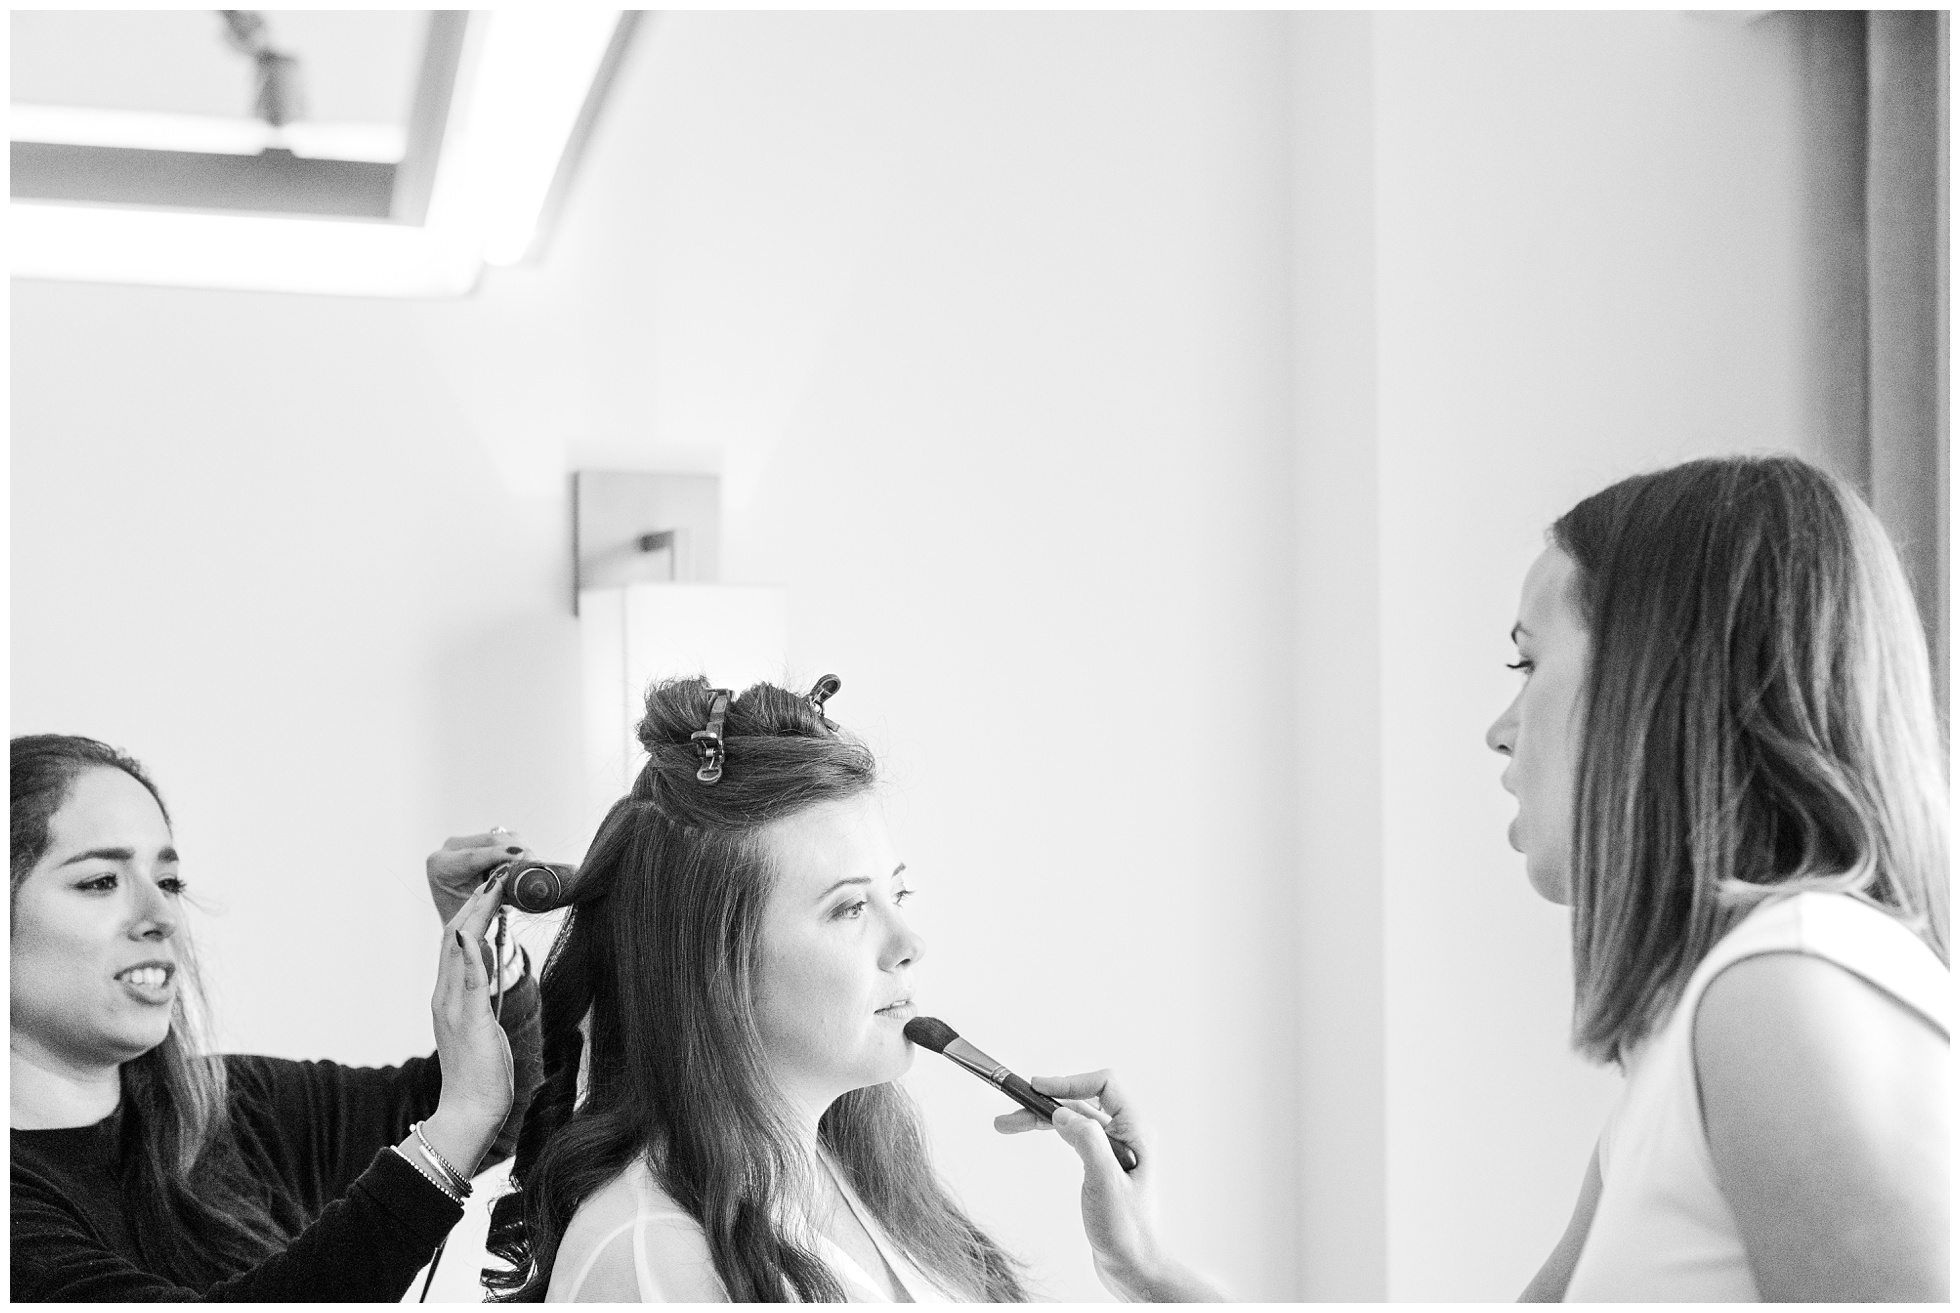 hair and makeup artists work on a bride getting ready at the c.baldwin hotel.